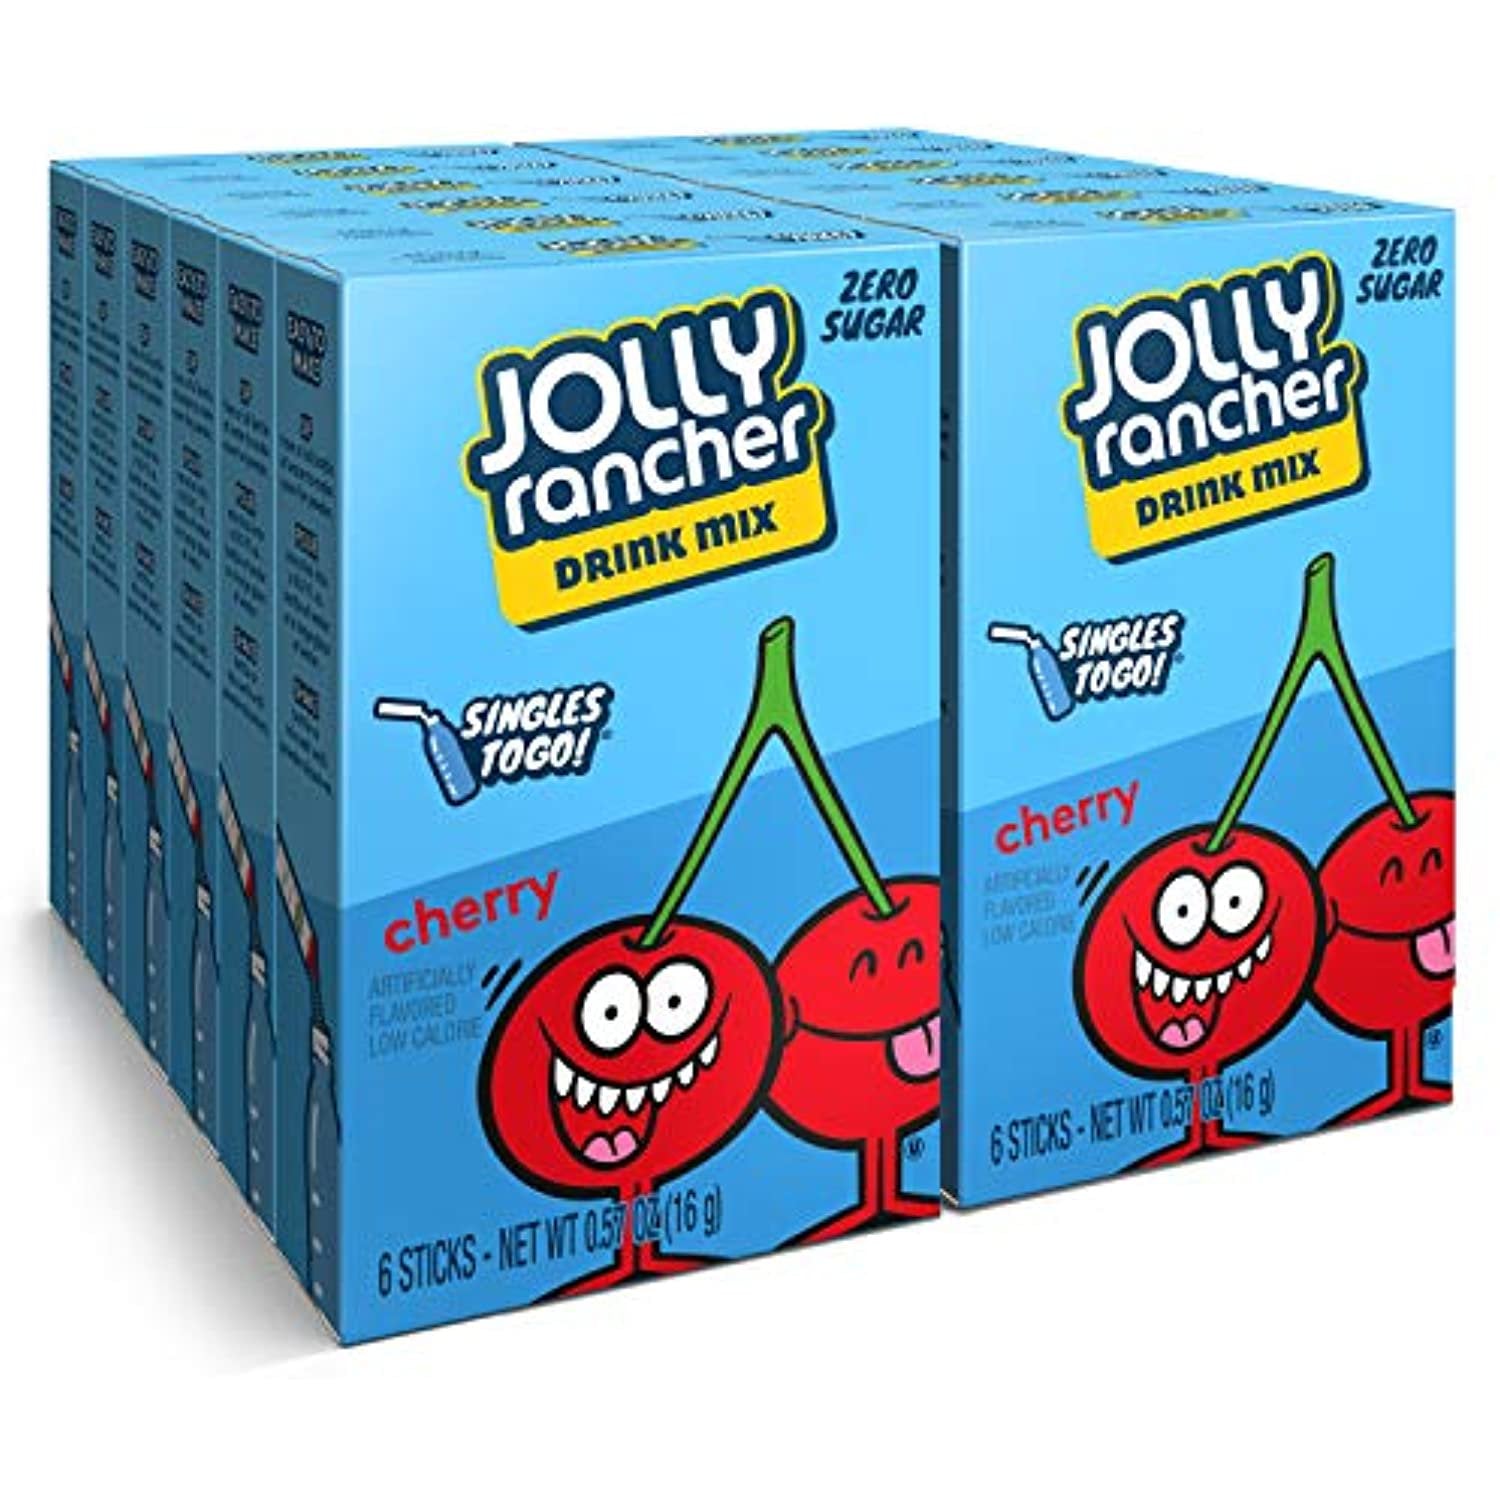 Jolly Rancher Cherry Singles to Go 6 Pack (225.6g) (12 Pack)